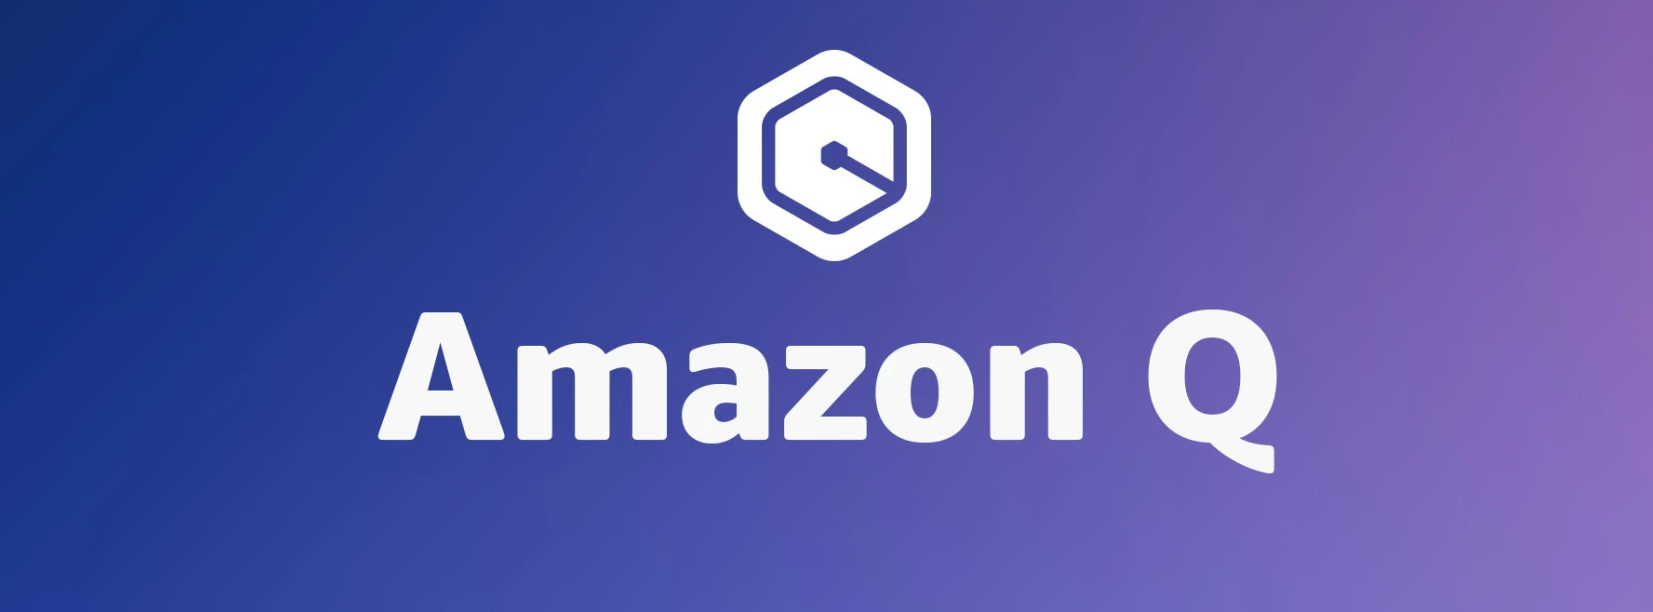 AWS announced the general availability of Amazon Q